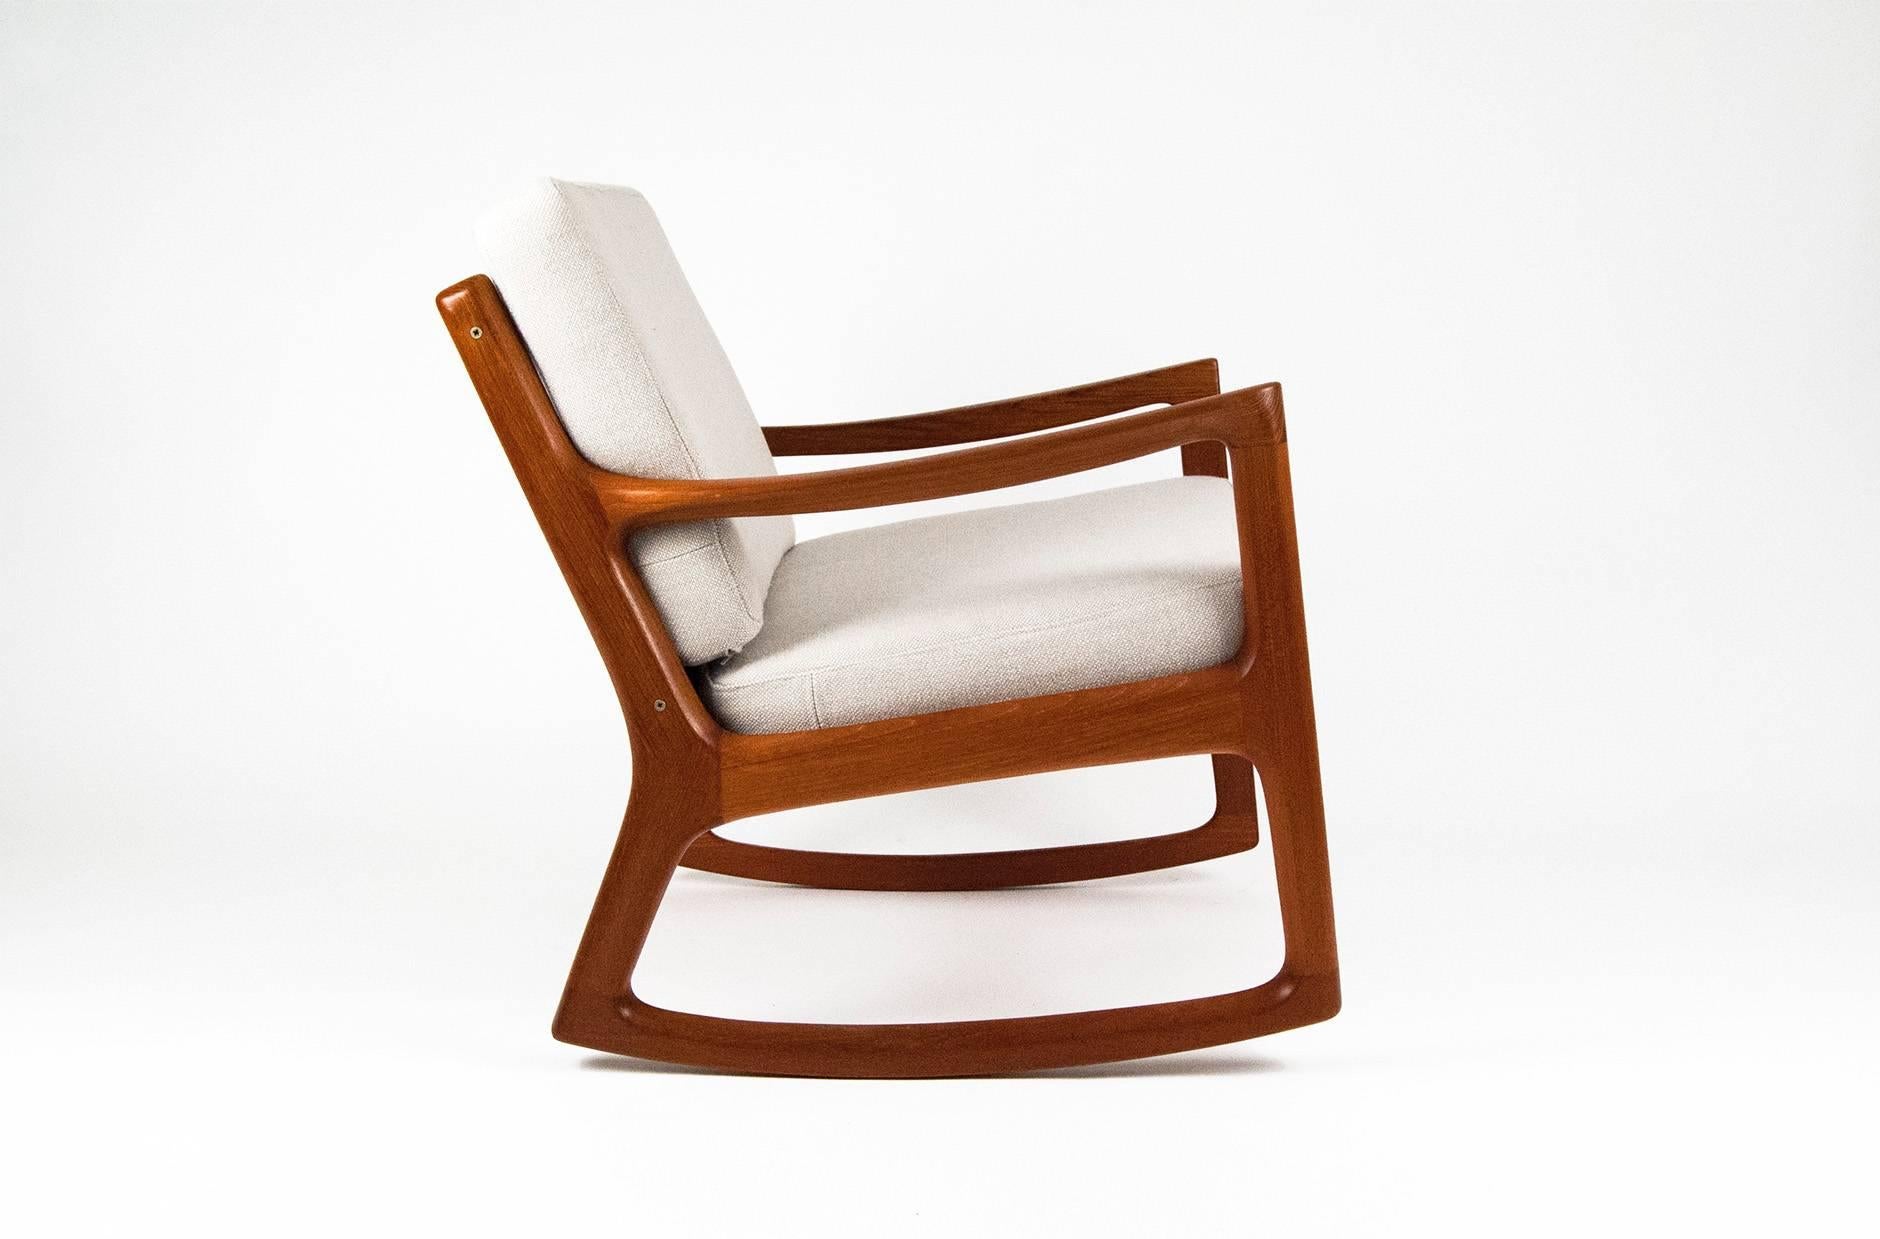 Ole Wanscher 'Senator' rocking chair, circa 1960. Produced by Cado, Denmark. Includes maker's stamp and production number. New cushions covered in Kvadrat Hallingdal No. 103 woven wool fabric. Restored, oiled teakwood.